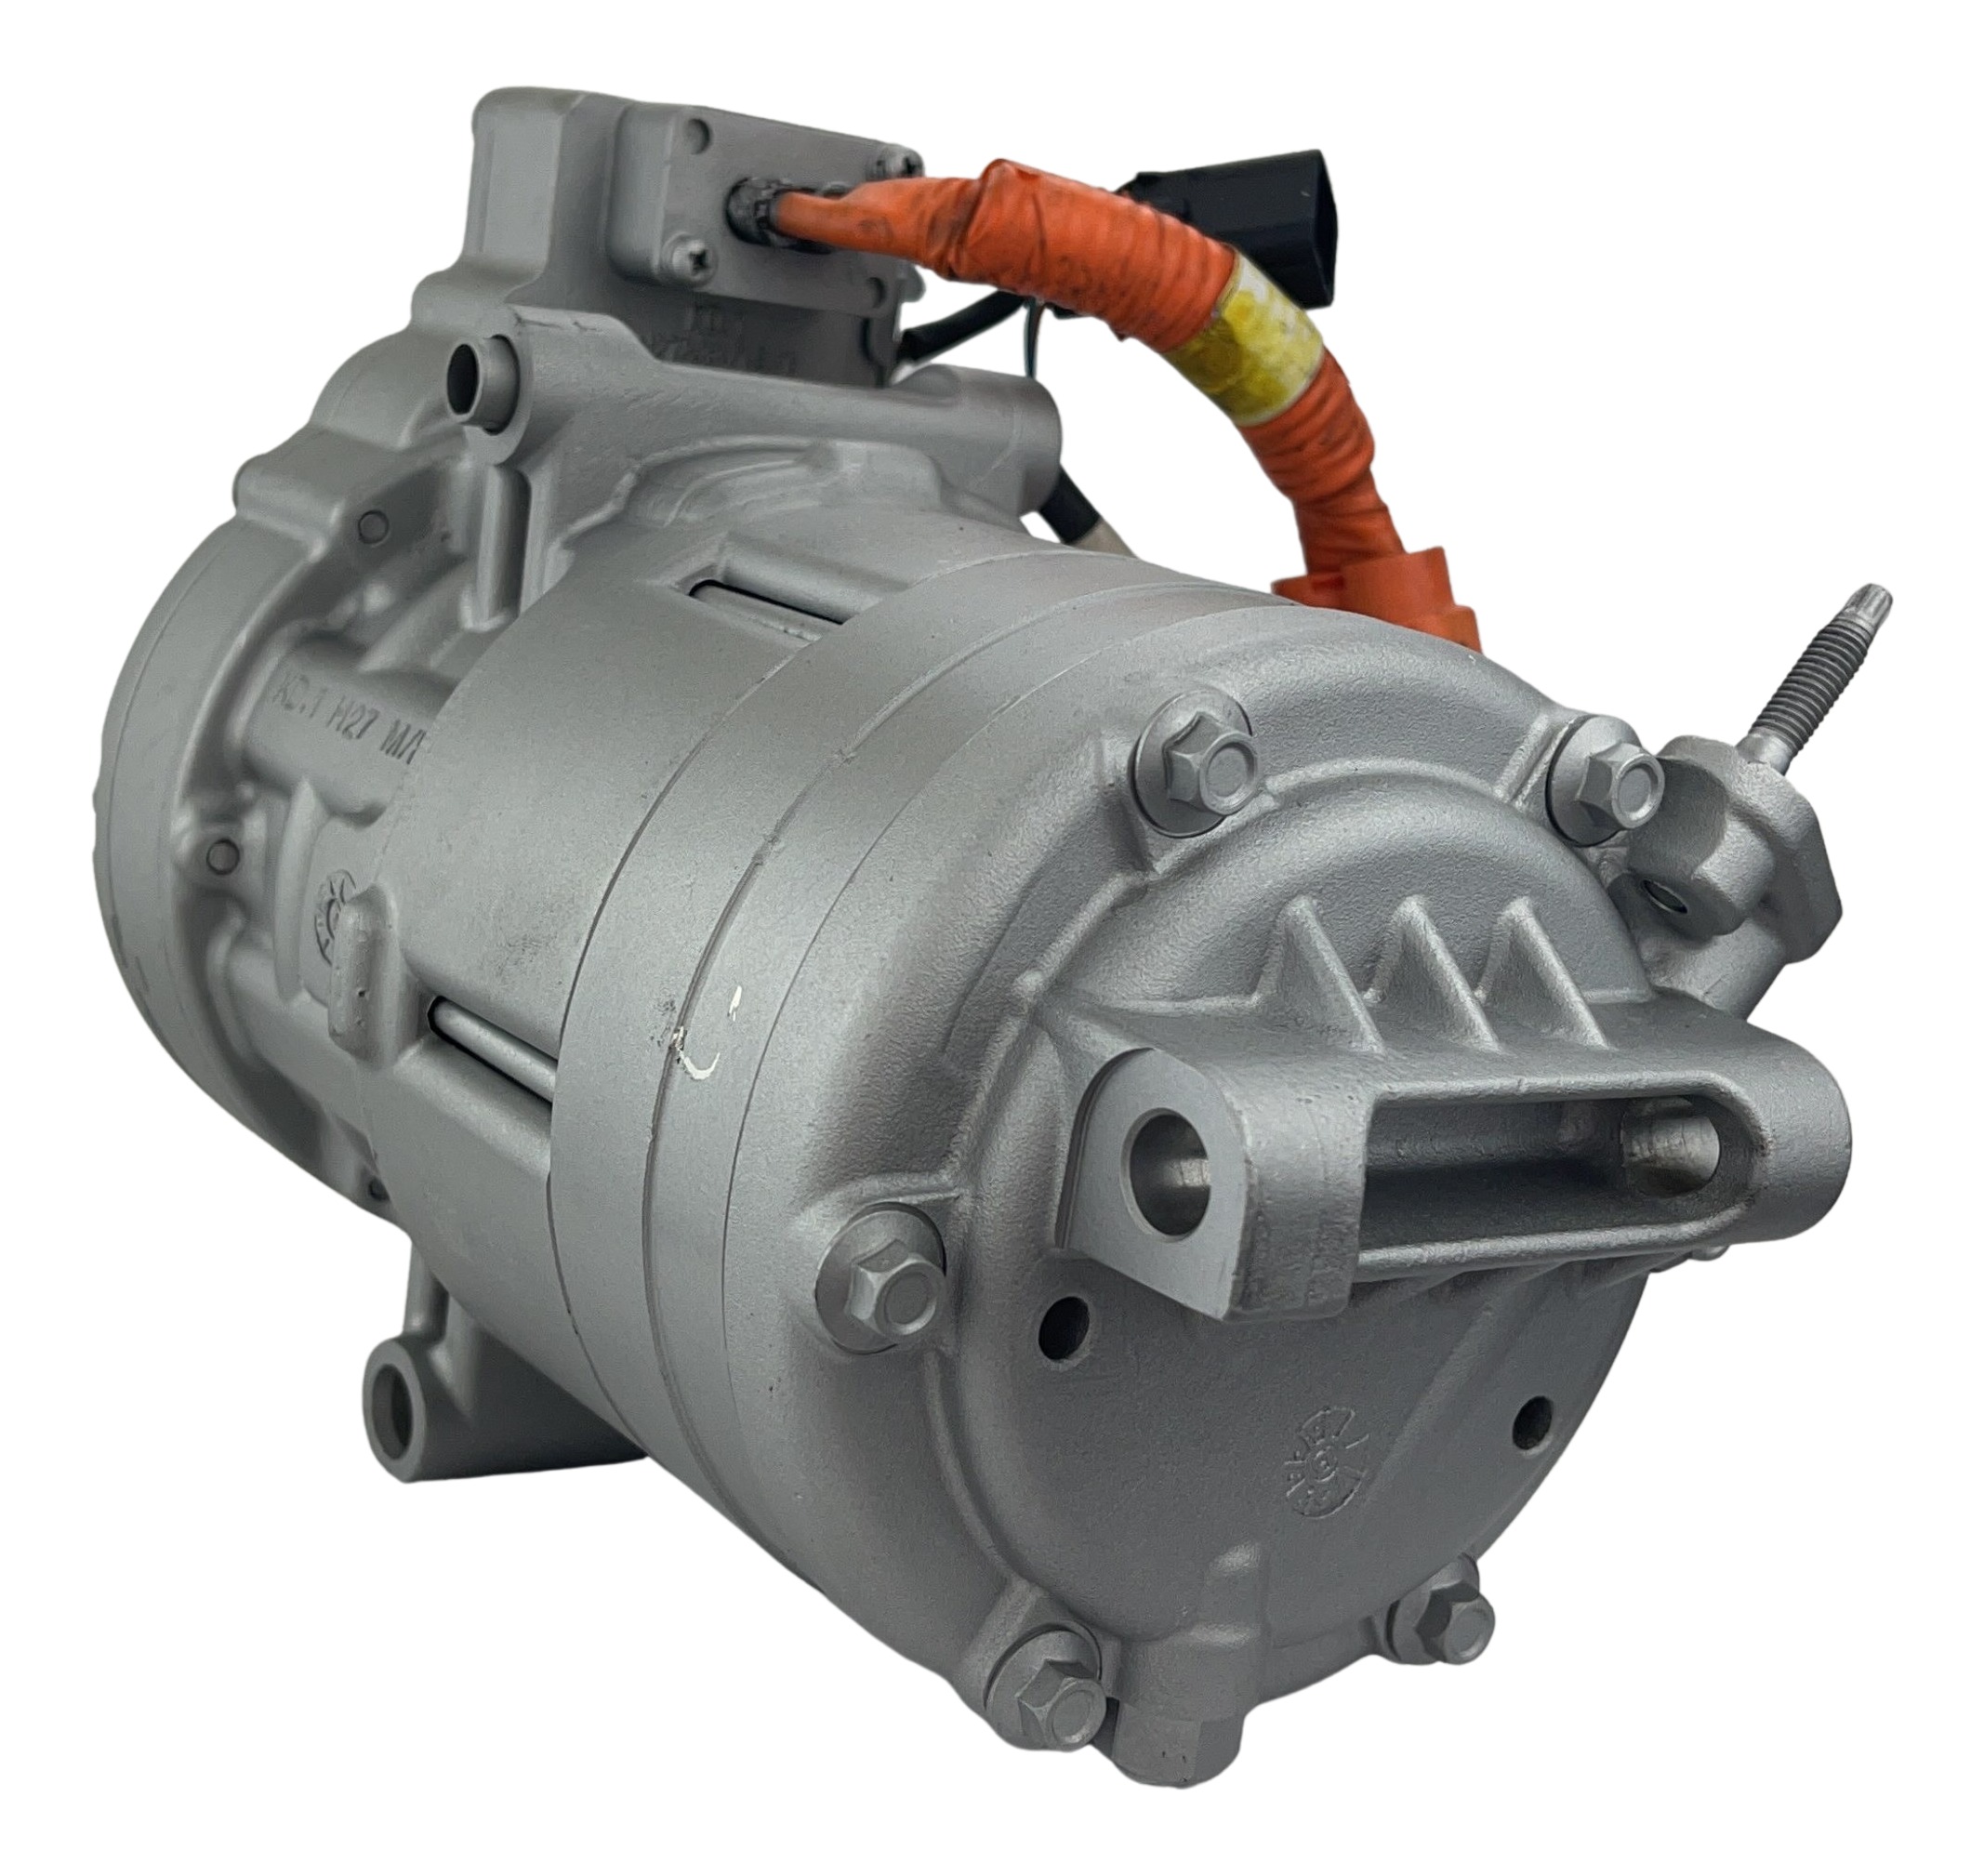 20431.000 Remanufactured A/C Compressor by TCW Product Image field_60b6a13a6e67c